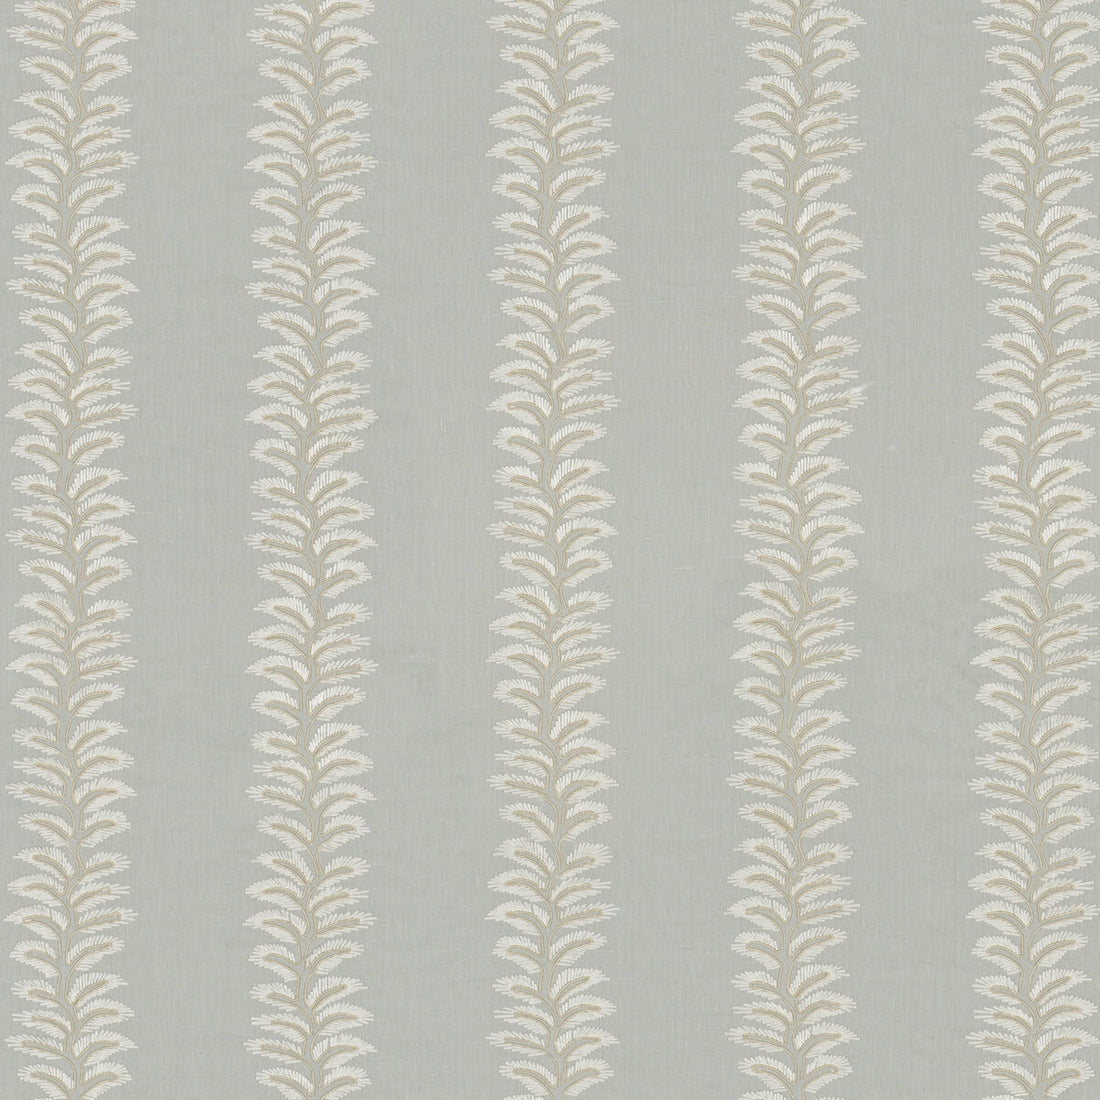 New Bradbourne fabric in pale aqua color - pattern BF10946.715.0 - by G P &amp; J Baker in the Ashmore collection